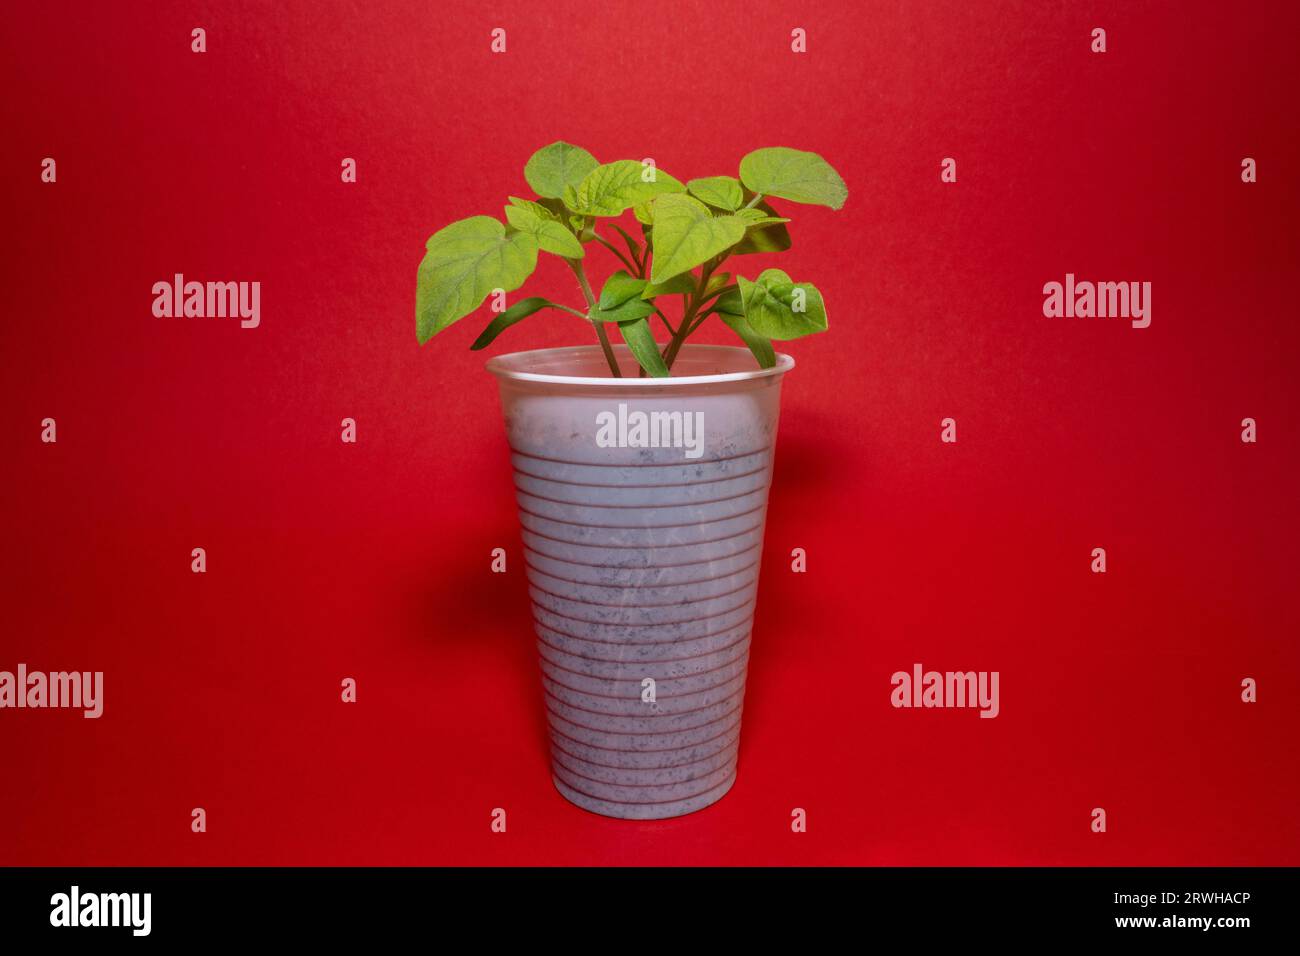 Tomato seedlings in a white plastic cup with red background Stock Photo